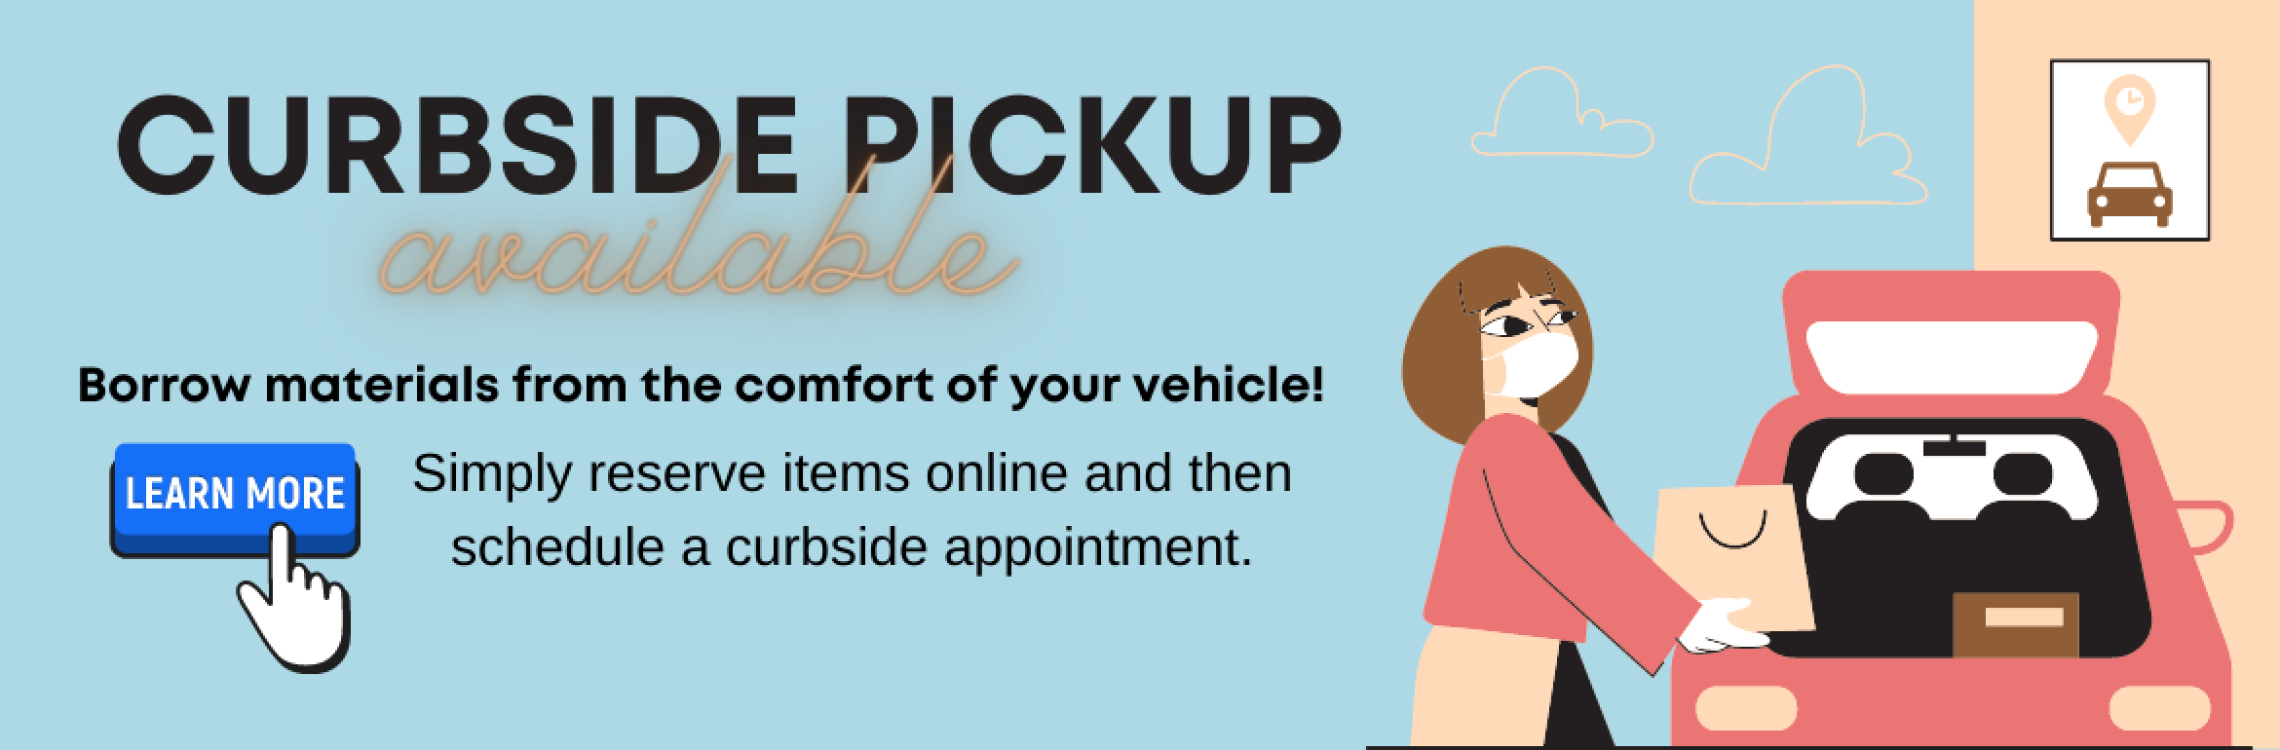 Curbside pickup available